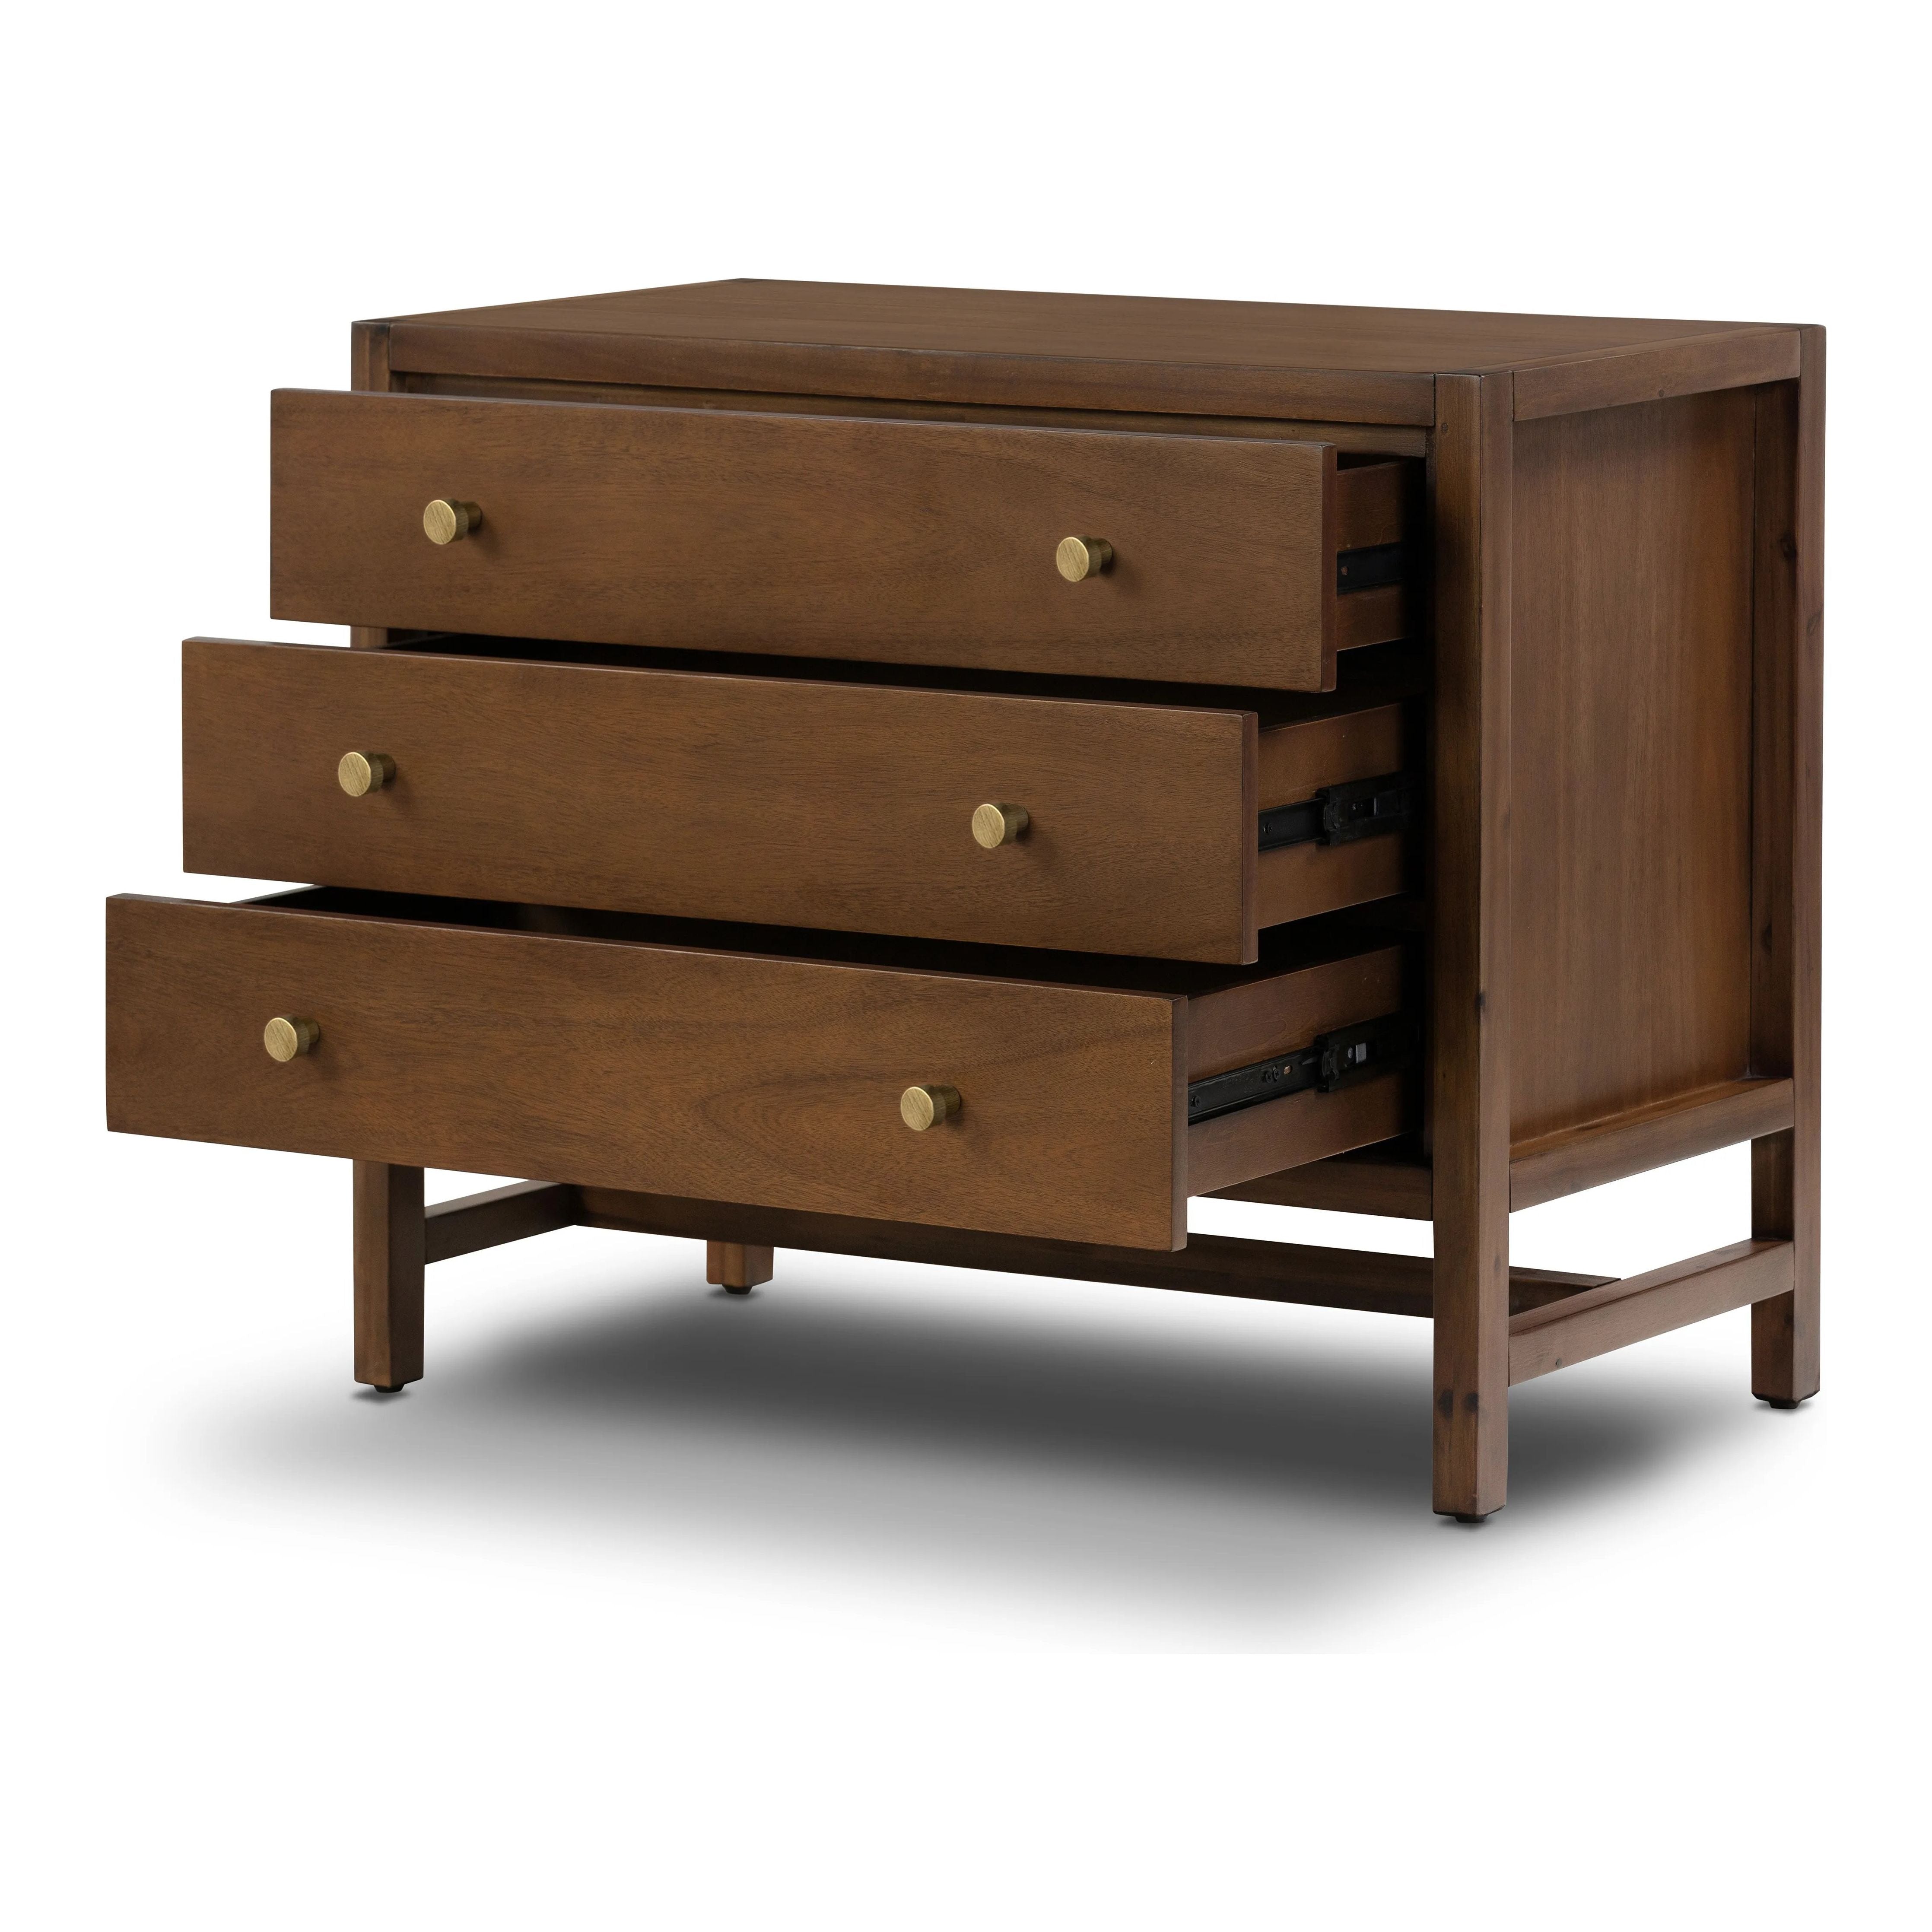 A simple, heavy wood Parsons-style nightstand with three drawers for ample storage. Finished in solid ash with brass hardware Amethyst Home provides interior design, new home construction design consulting, vintage area rugs, and lighting in the Scottsdale metro area.